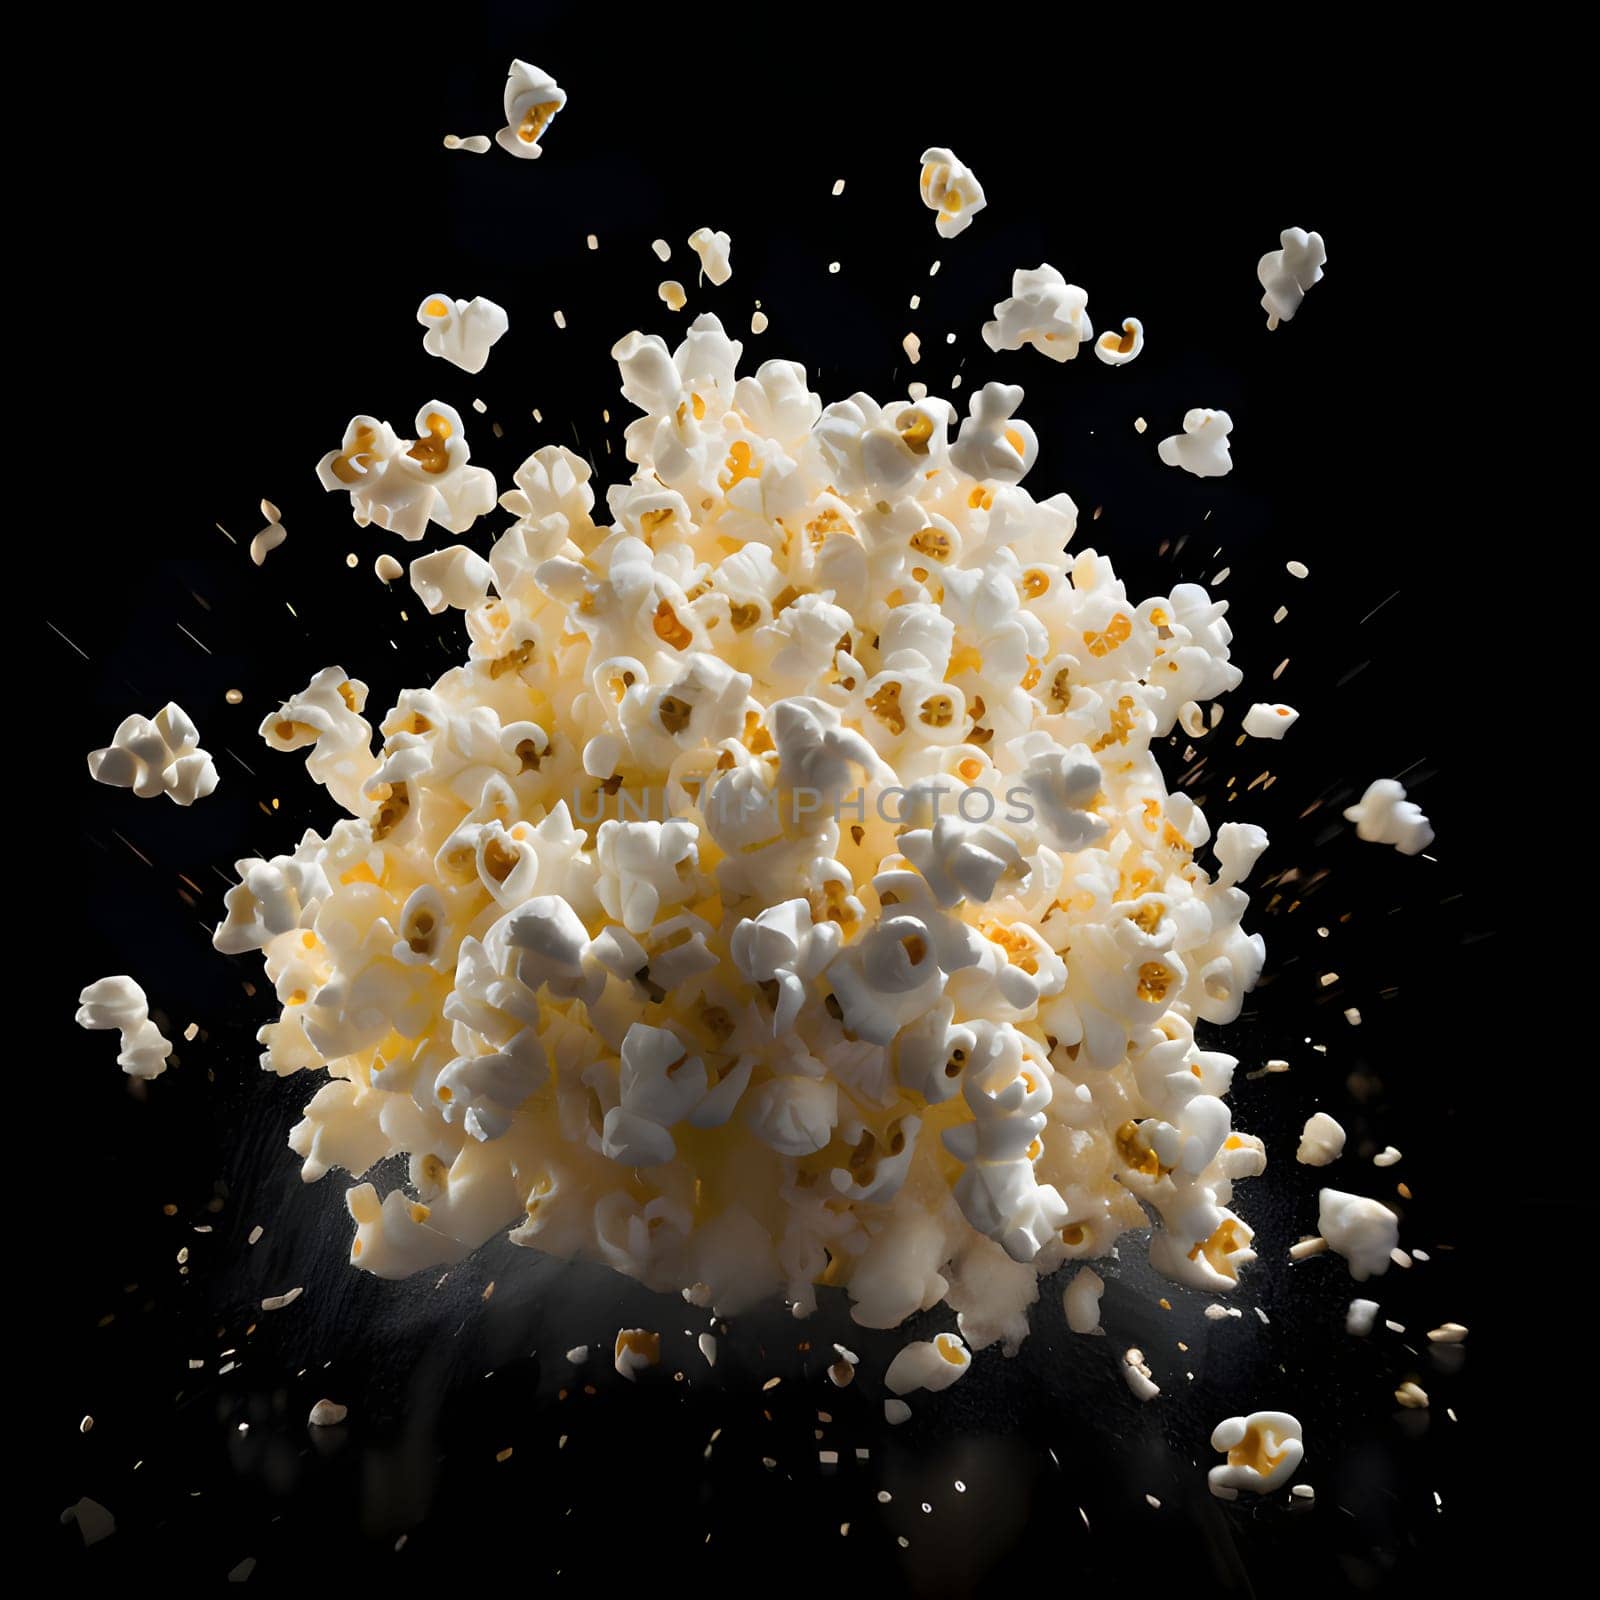 Popcorn isolated on a black background. Corn as a dish of thanksgiving for the harvest. An atmosphere of joy and celebration.